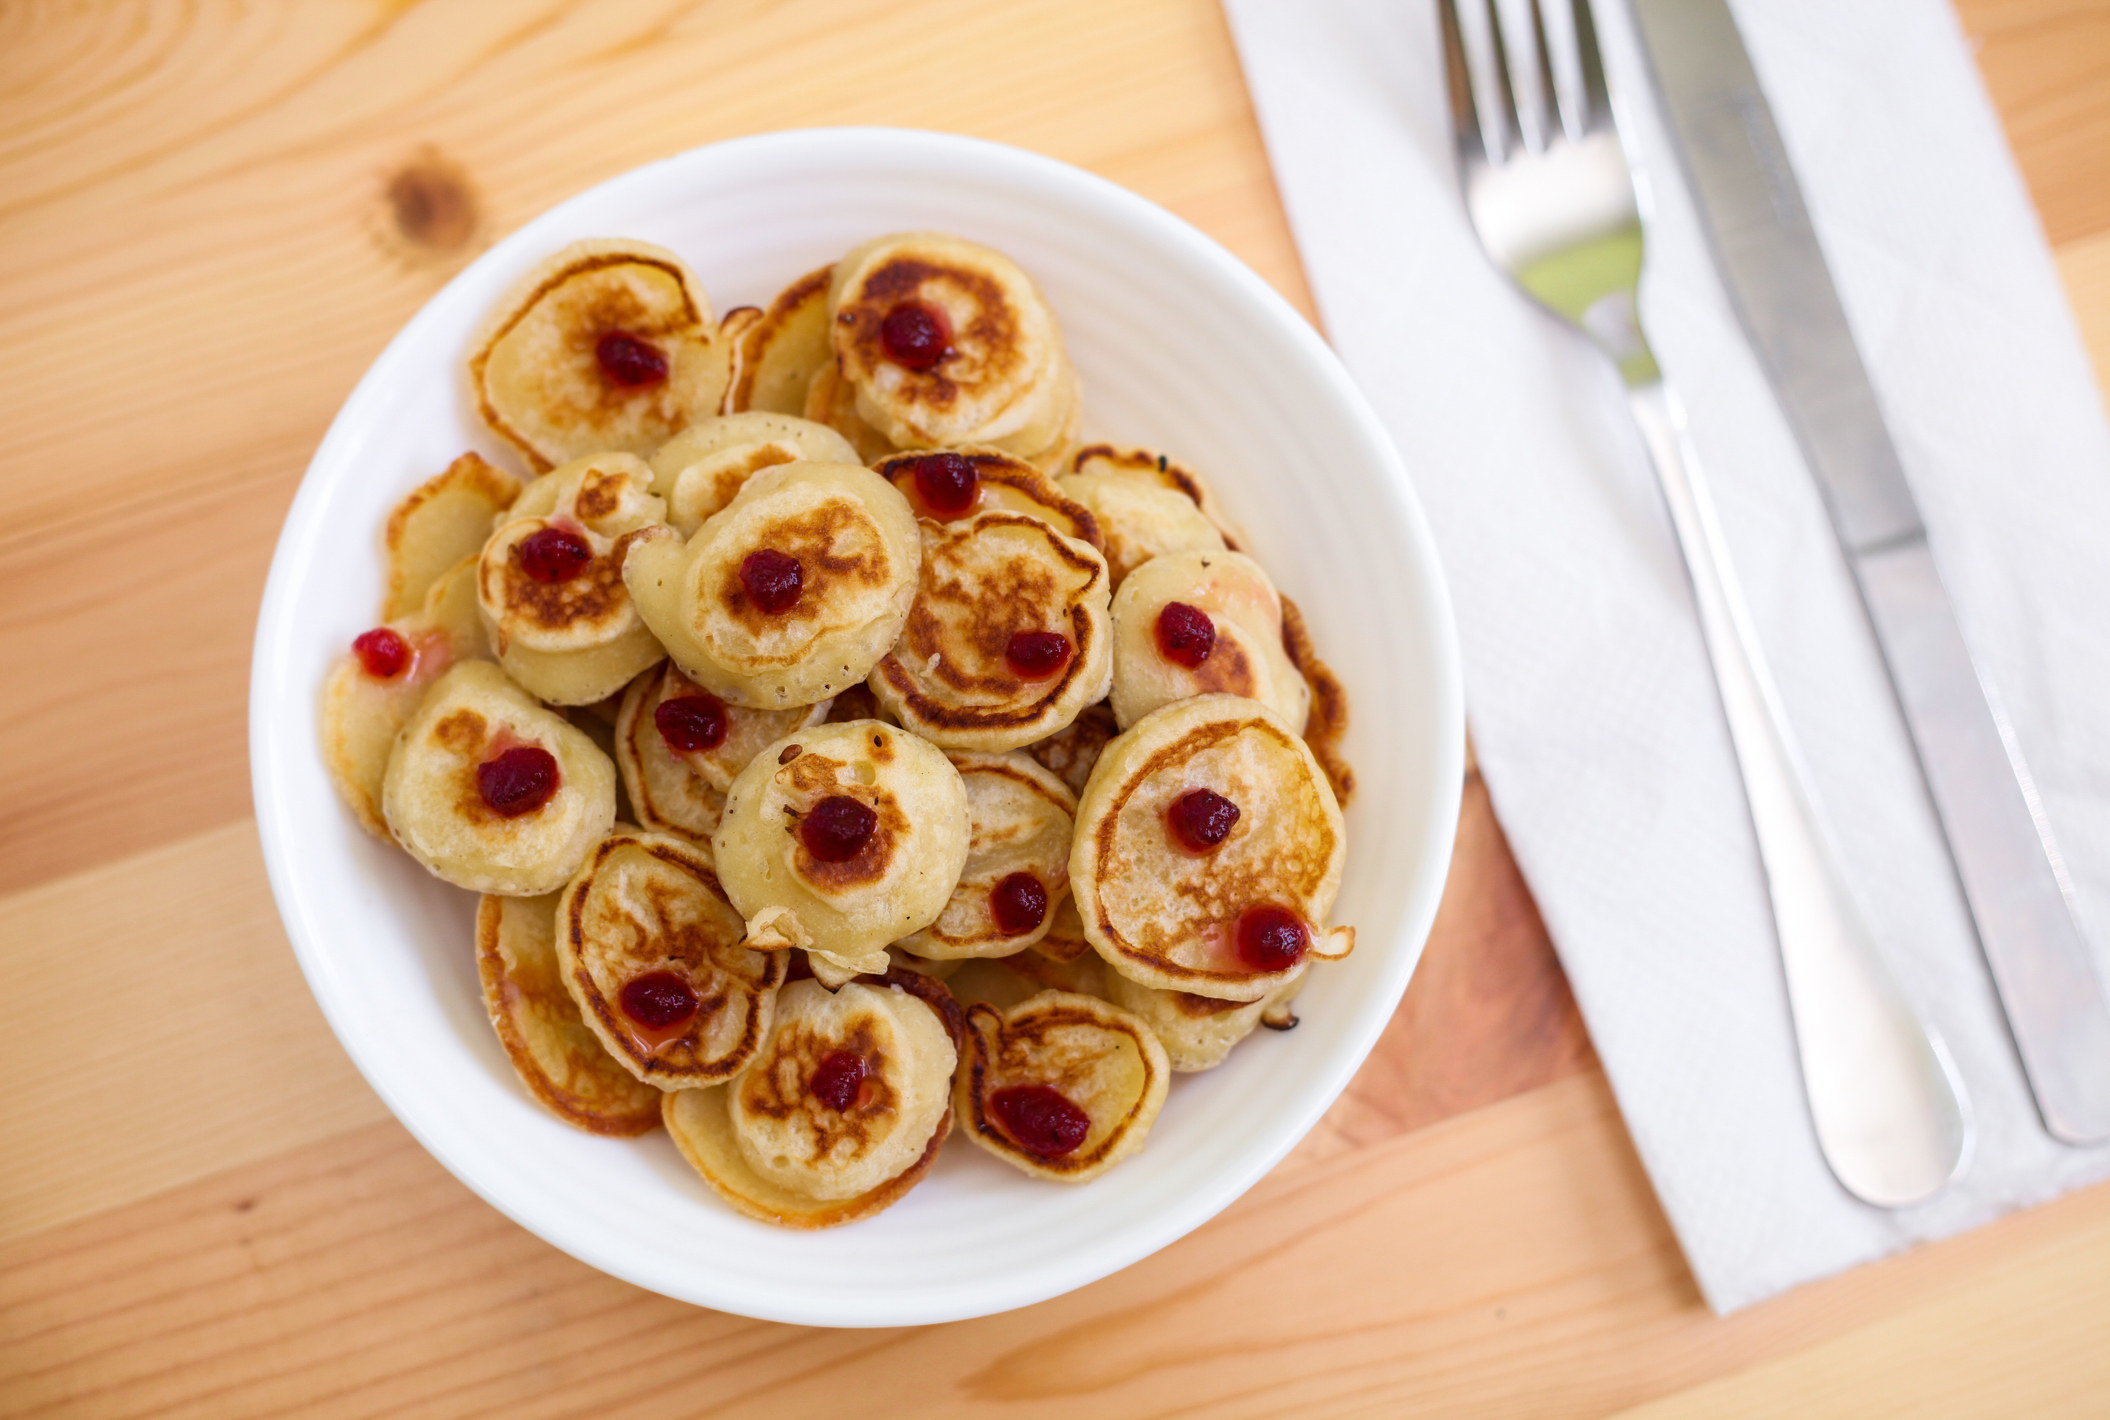 Small medallions of pancakes in a bowl